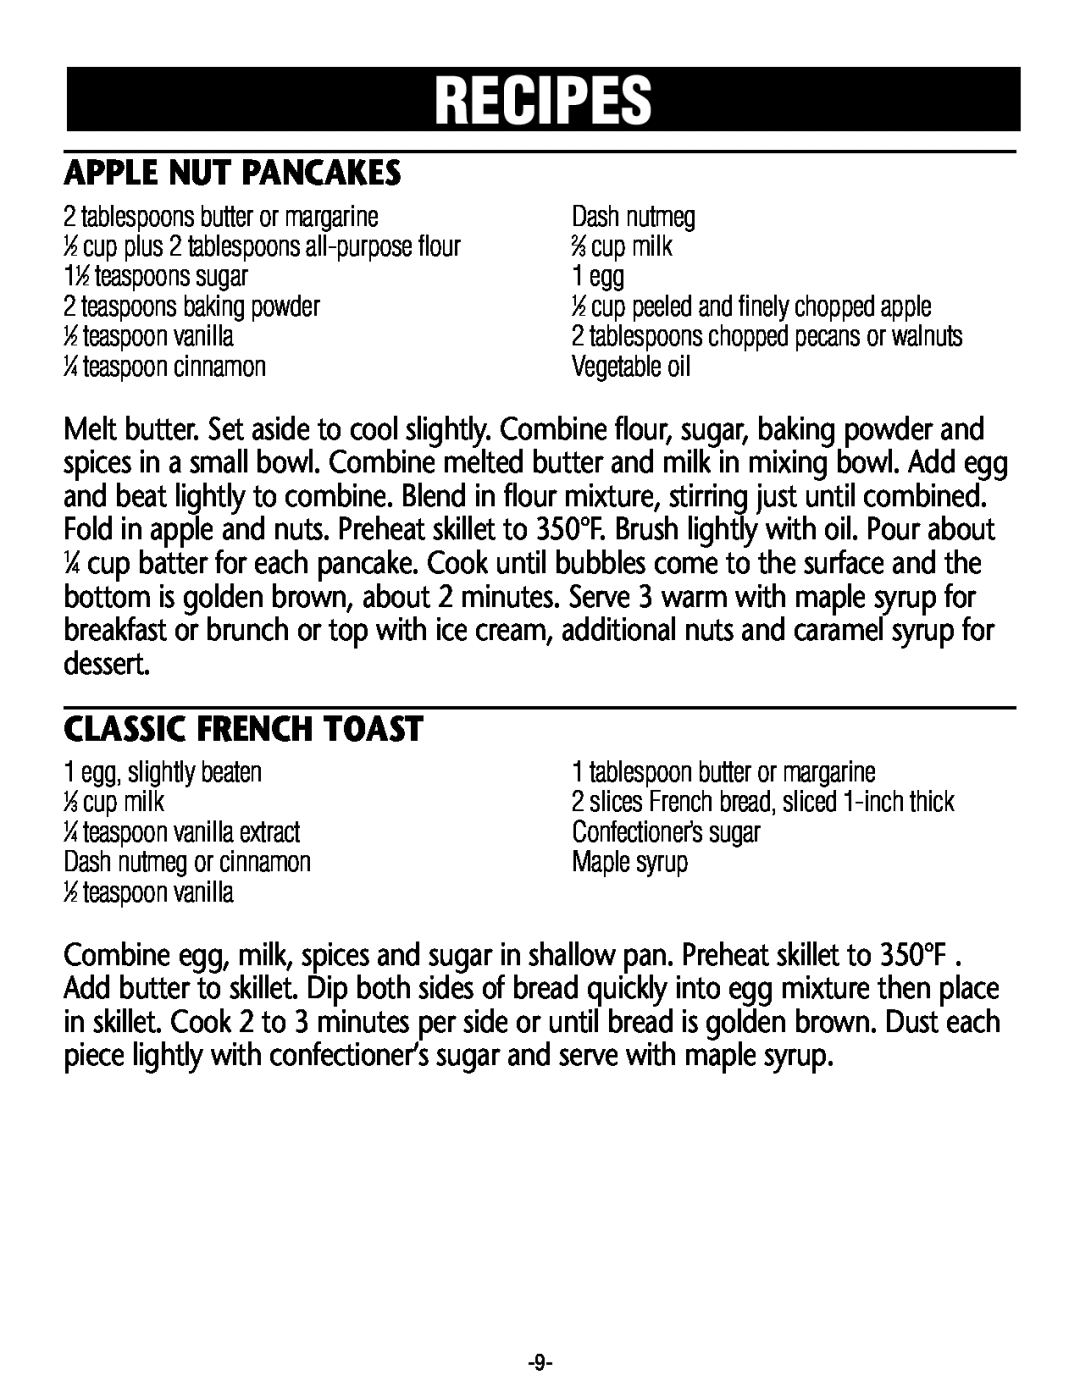 Rival S16RB manual Recipes, Apple Nut Pancakes, Classic French Toast 